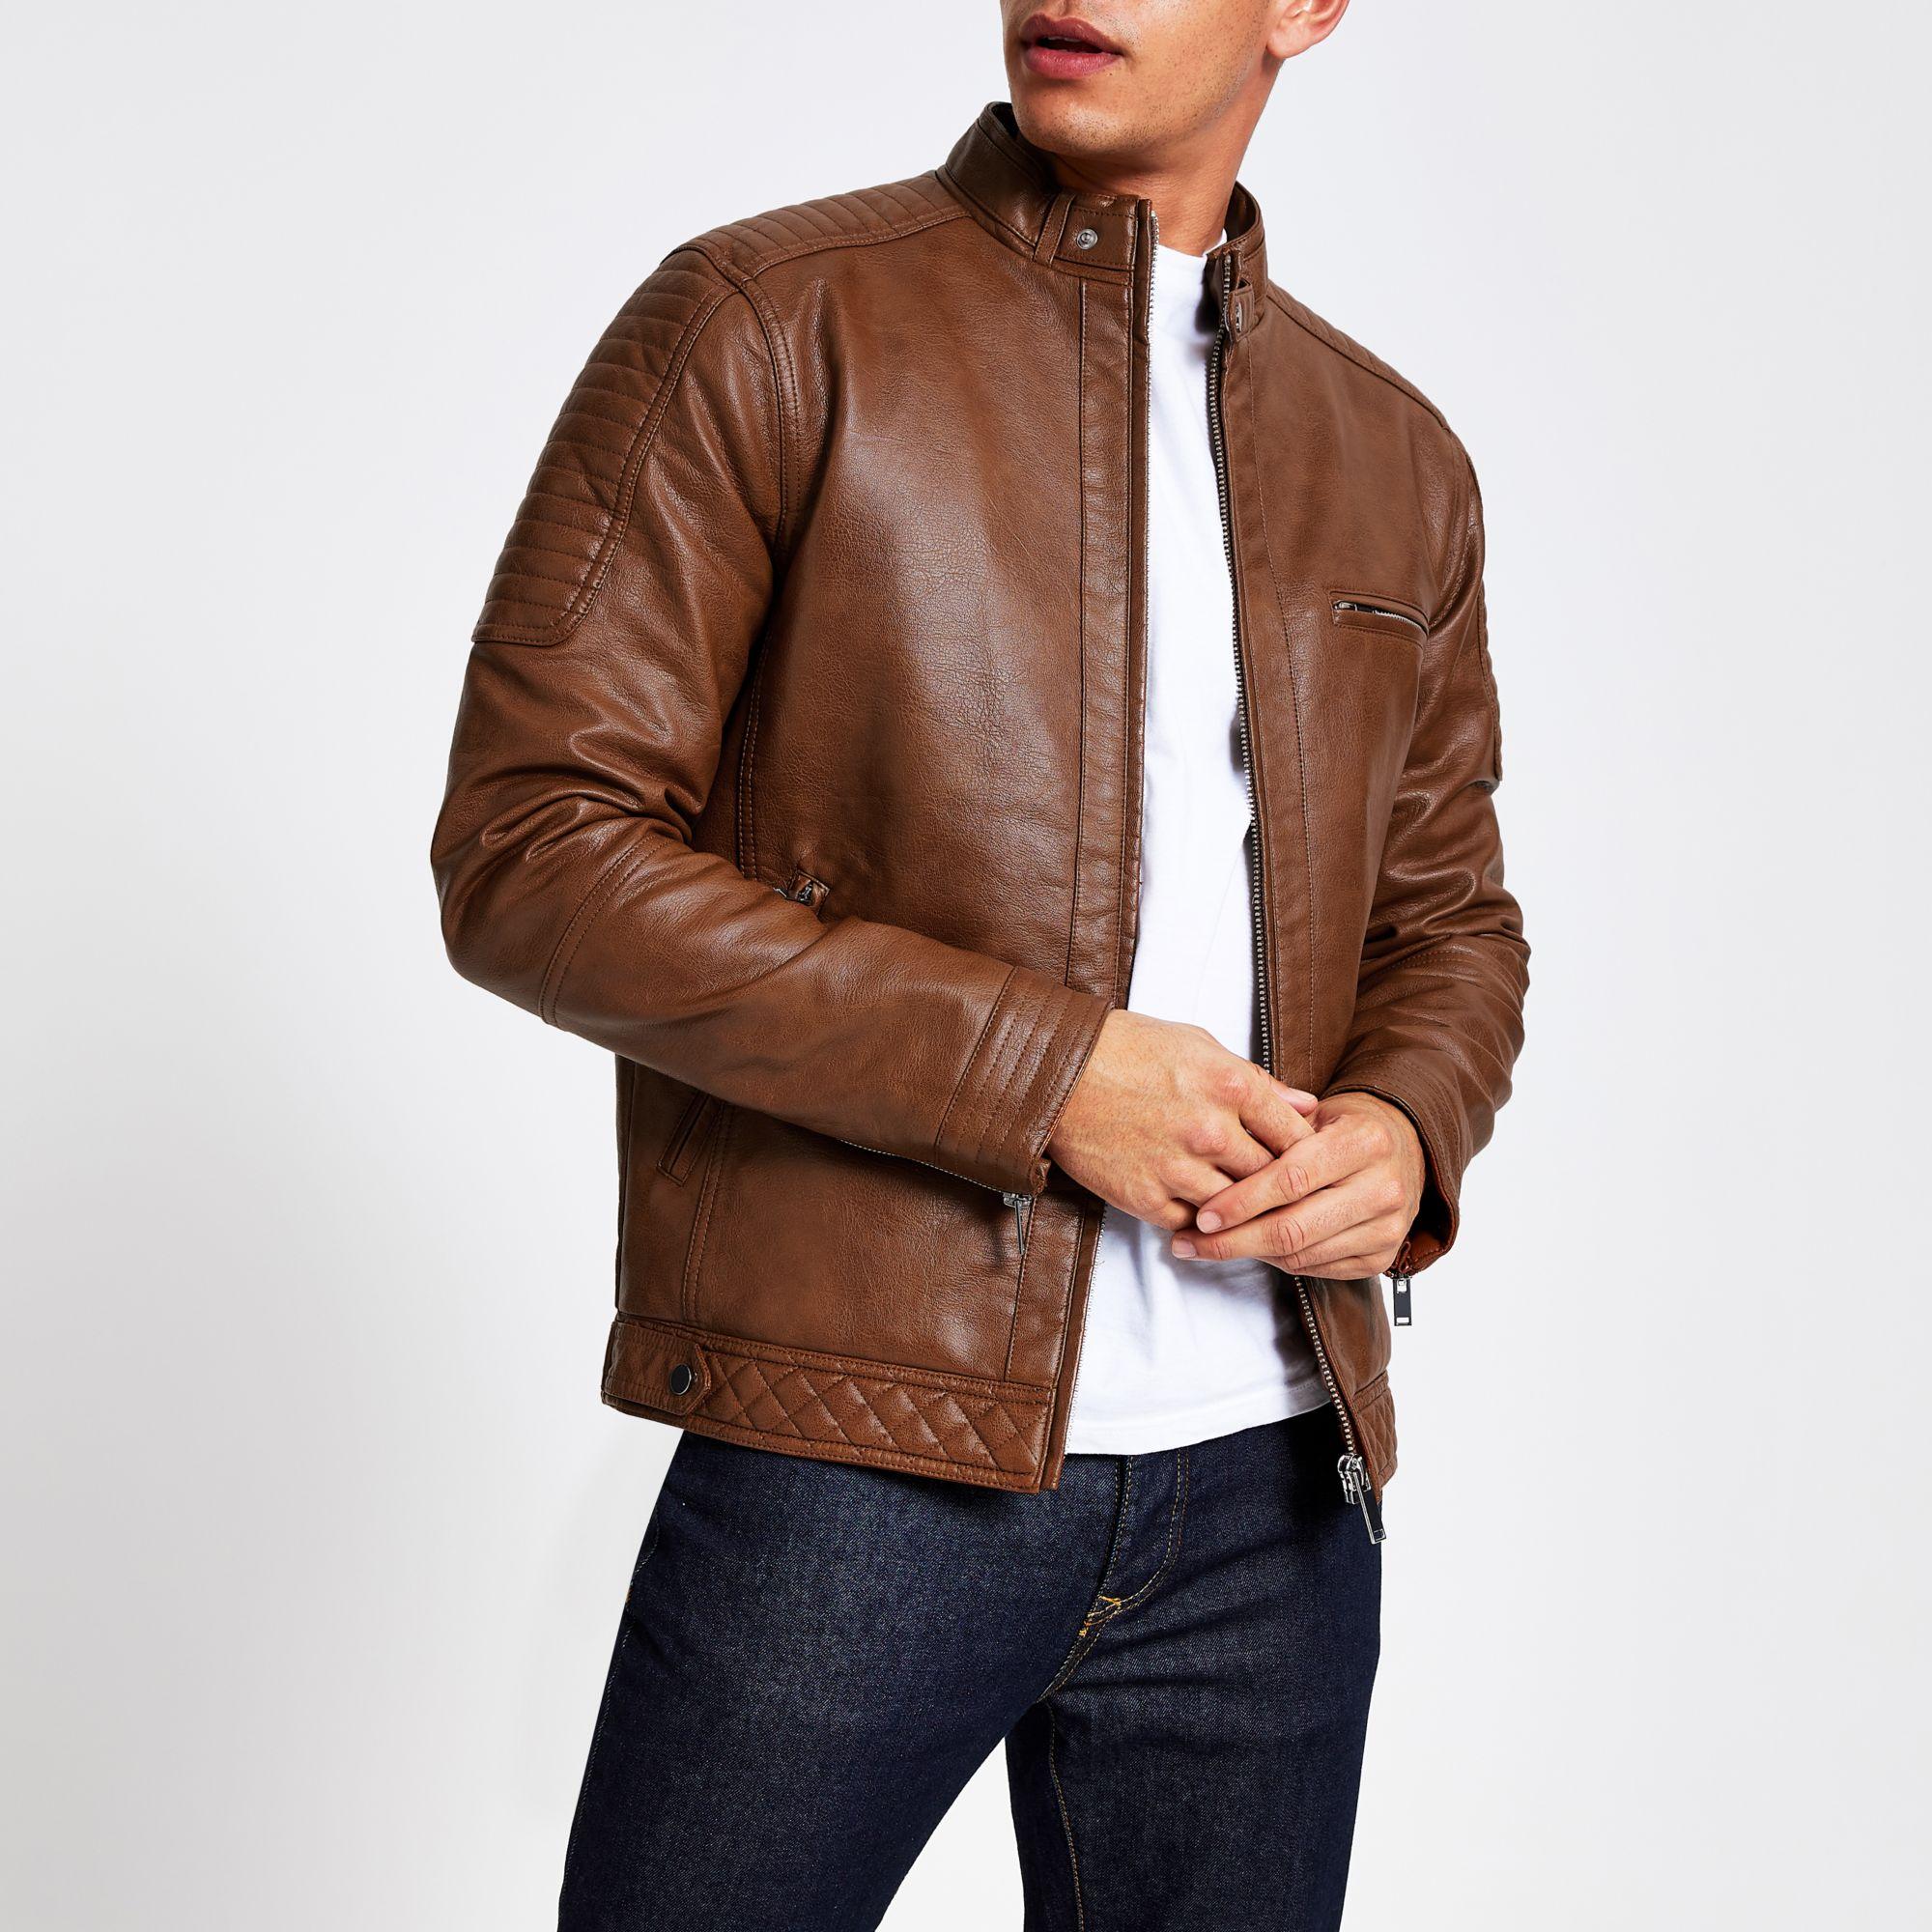 River Island Tan Faux Leather Racer Jacket in Brown for Men - Lyst